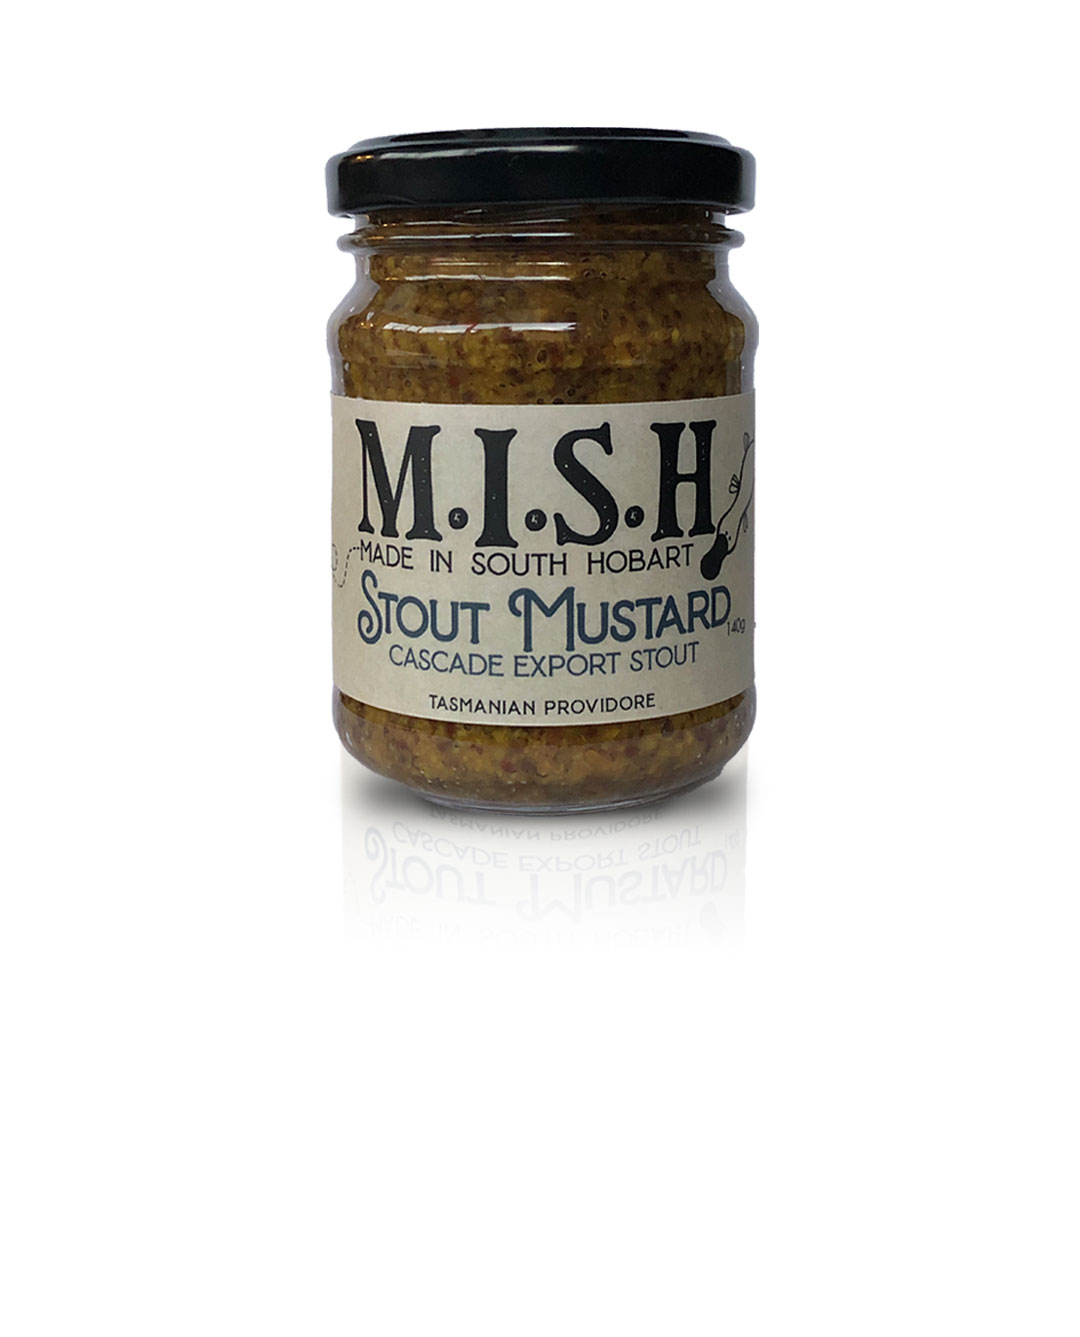 MISH Made in South Hobart stout mustard